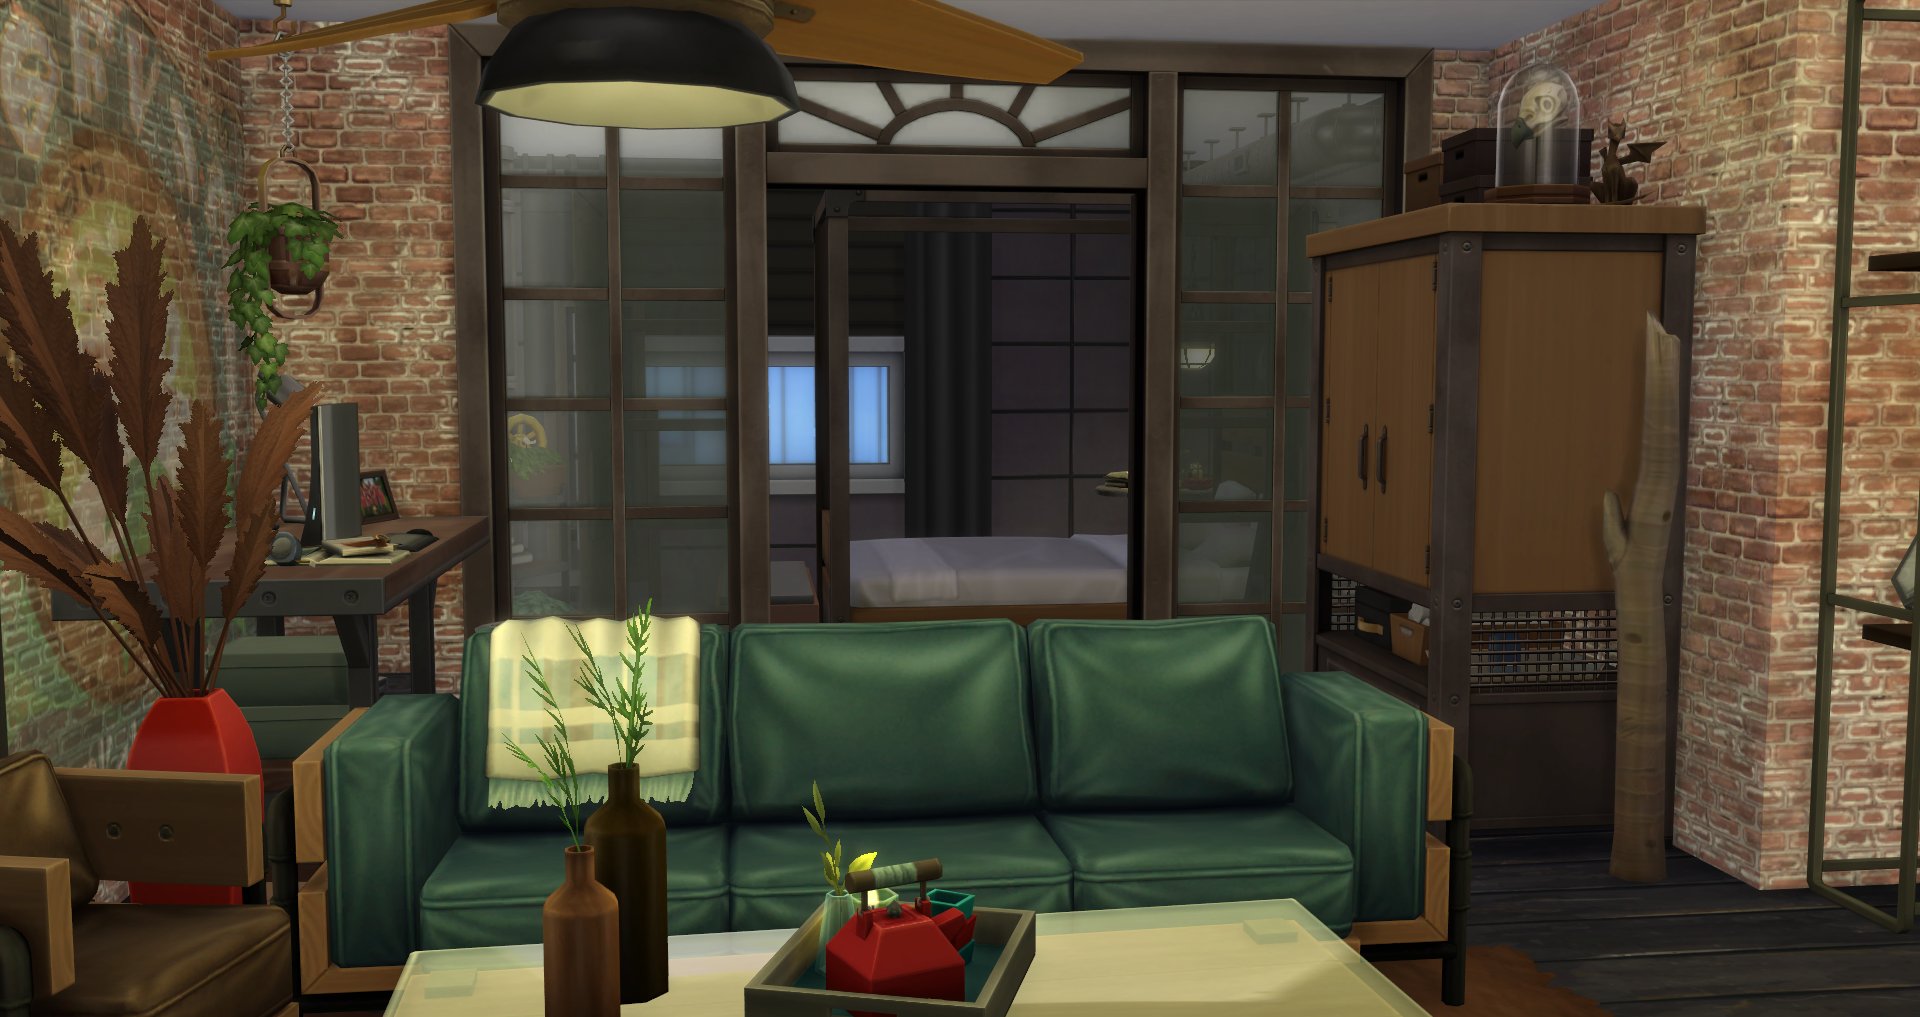 The Sims 4 Industrial Loft Kit: In-Game Screenshots | SimsVIP